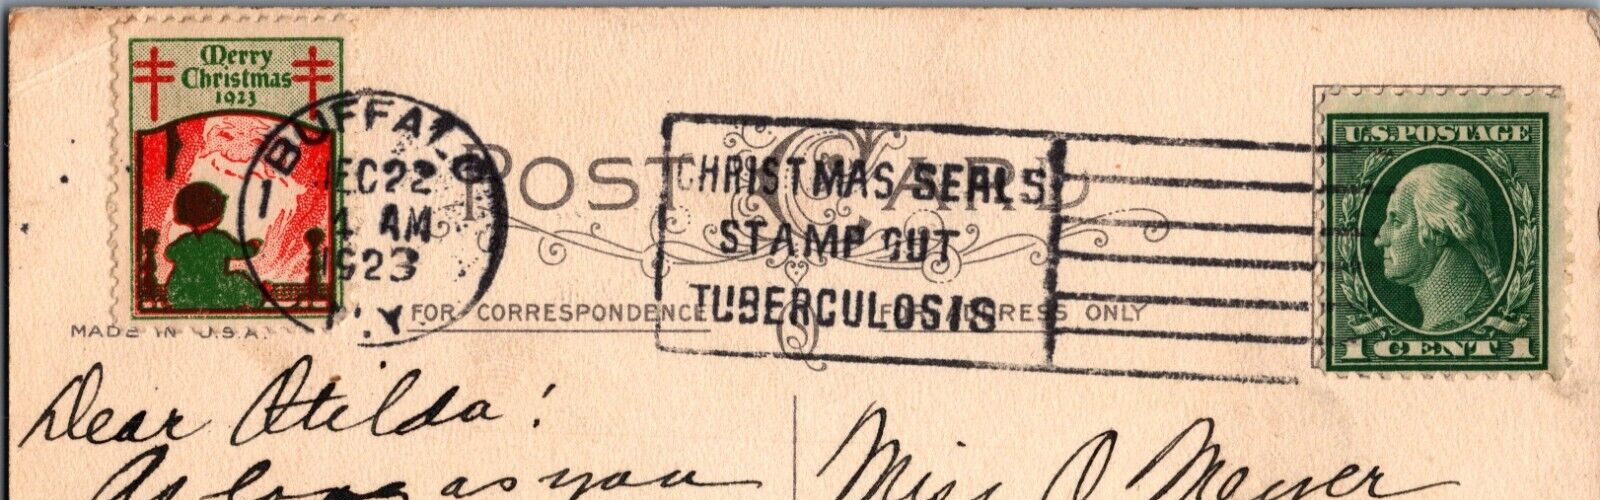 Rare 1923 Christmas Seal Tied to Postcard Clear Tuberculosis Cancel